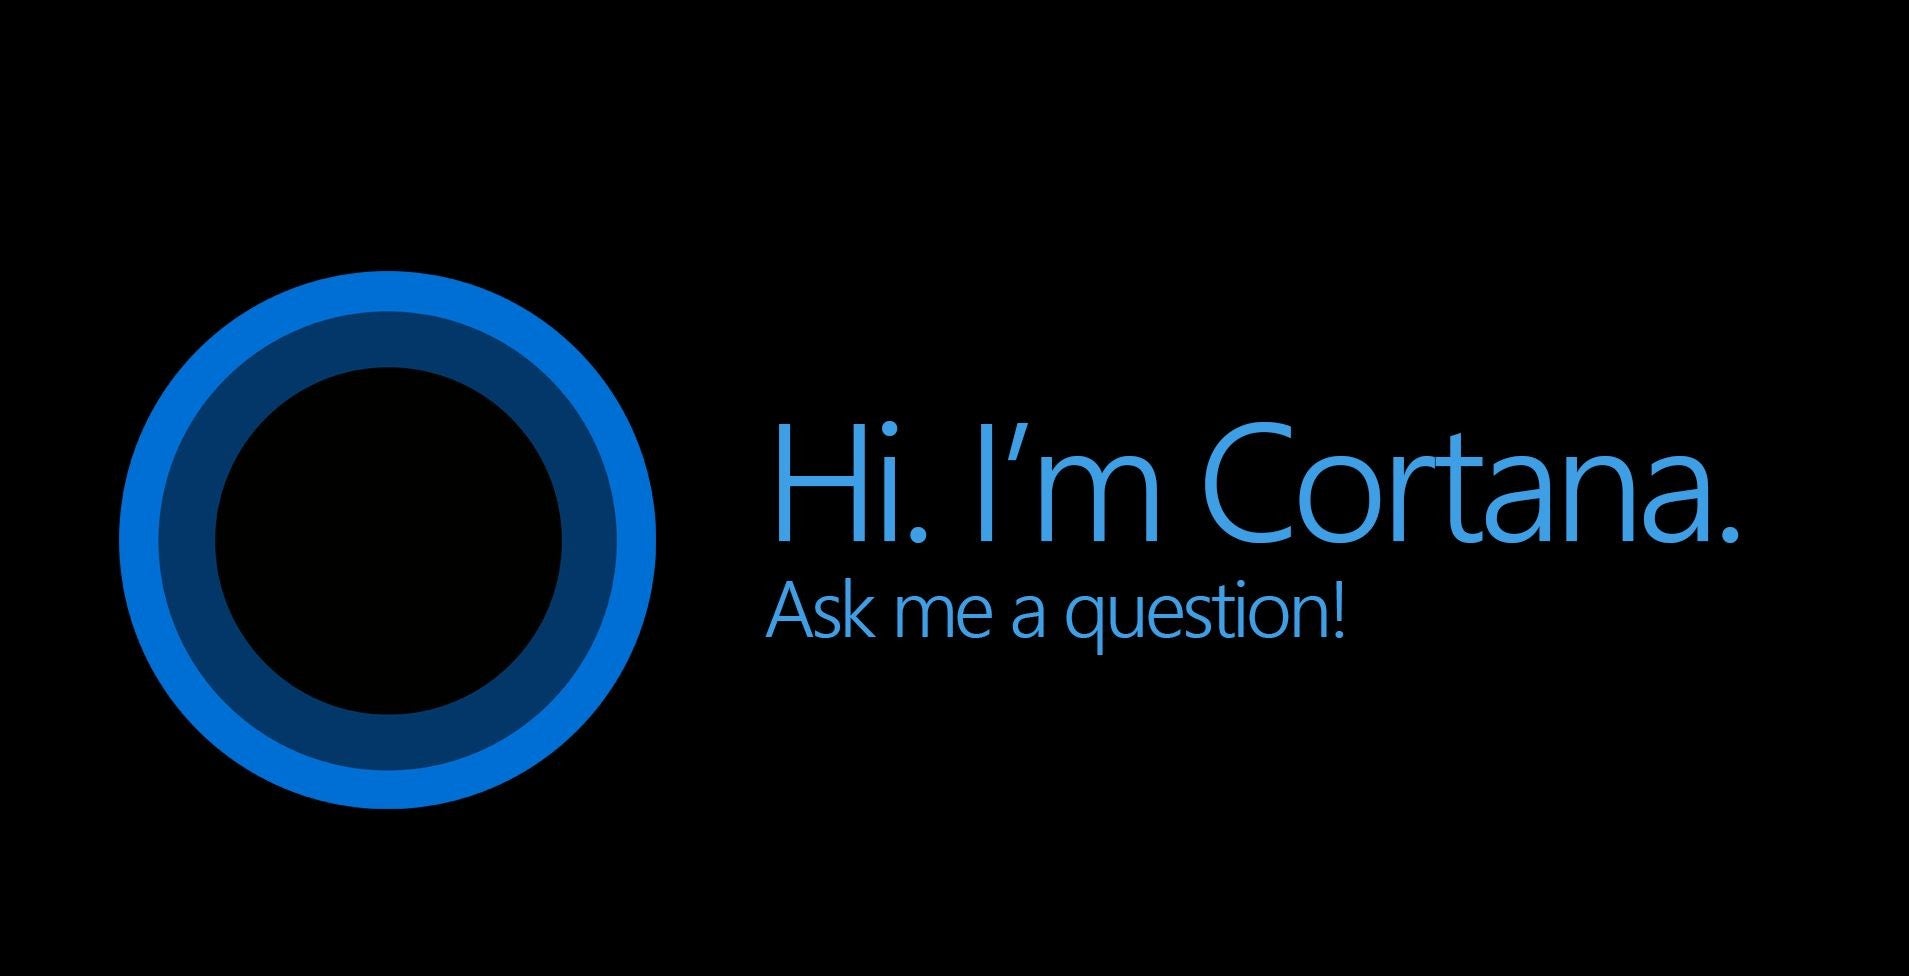 Cortana for Android updated with birthday reminder, other improvements